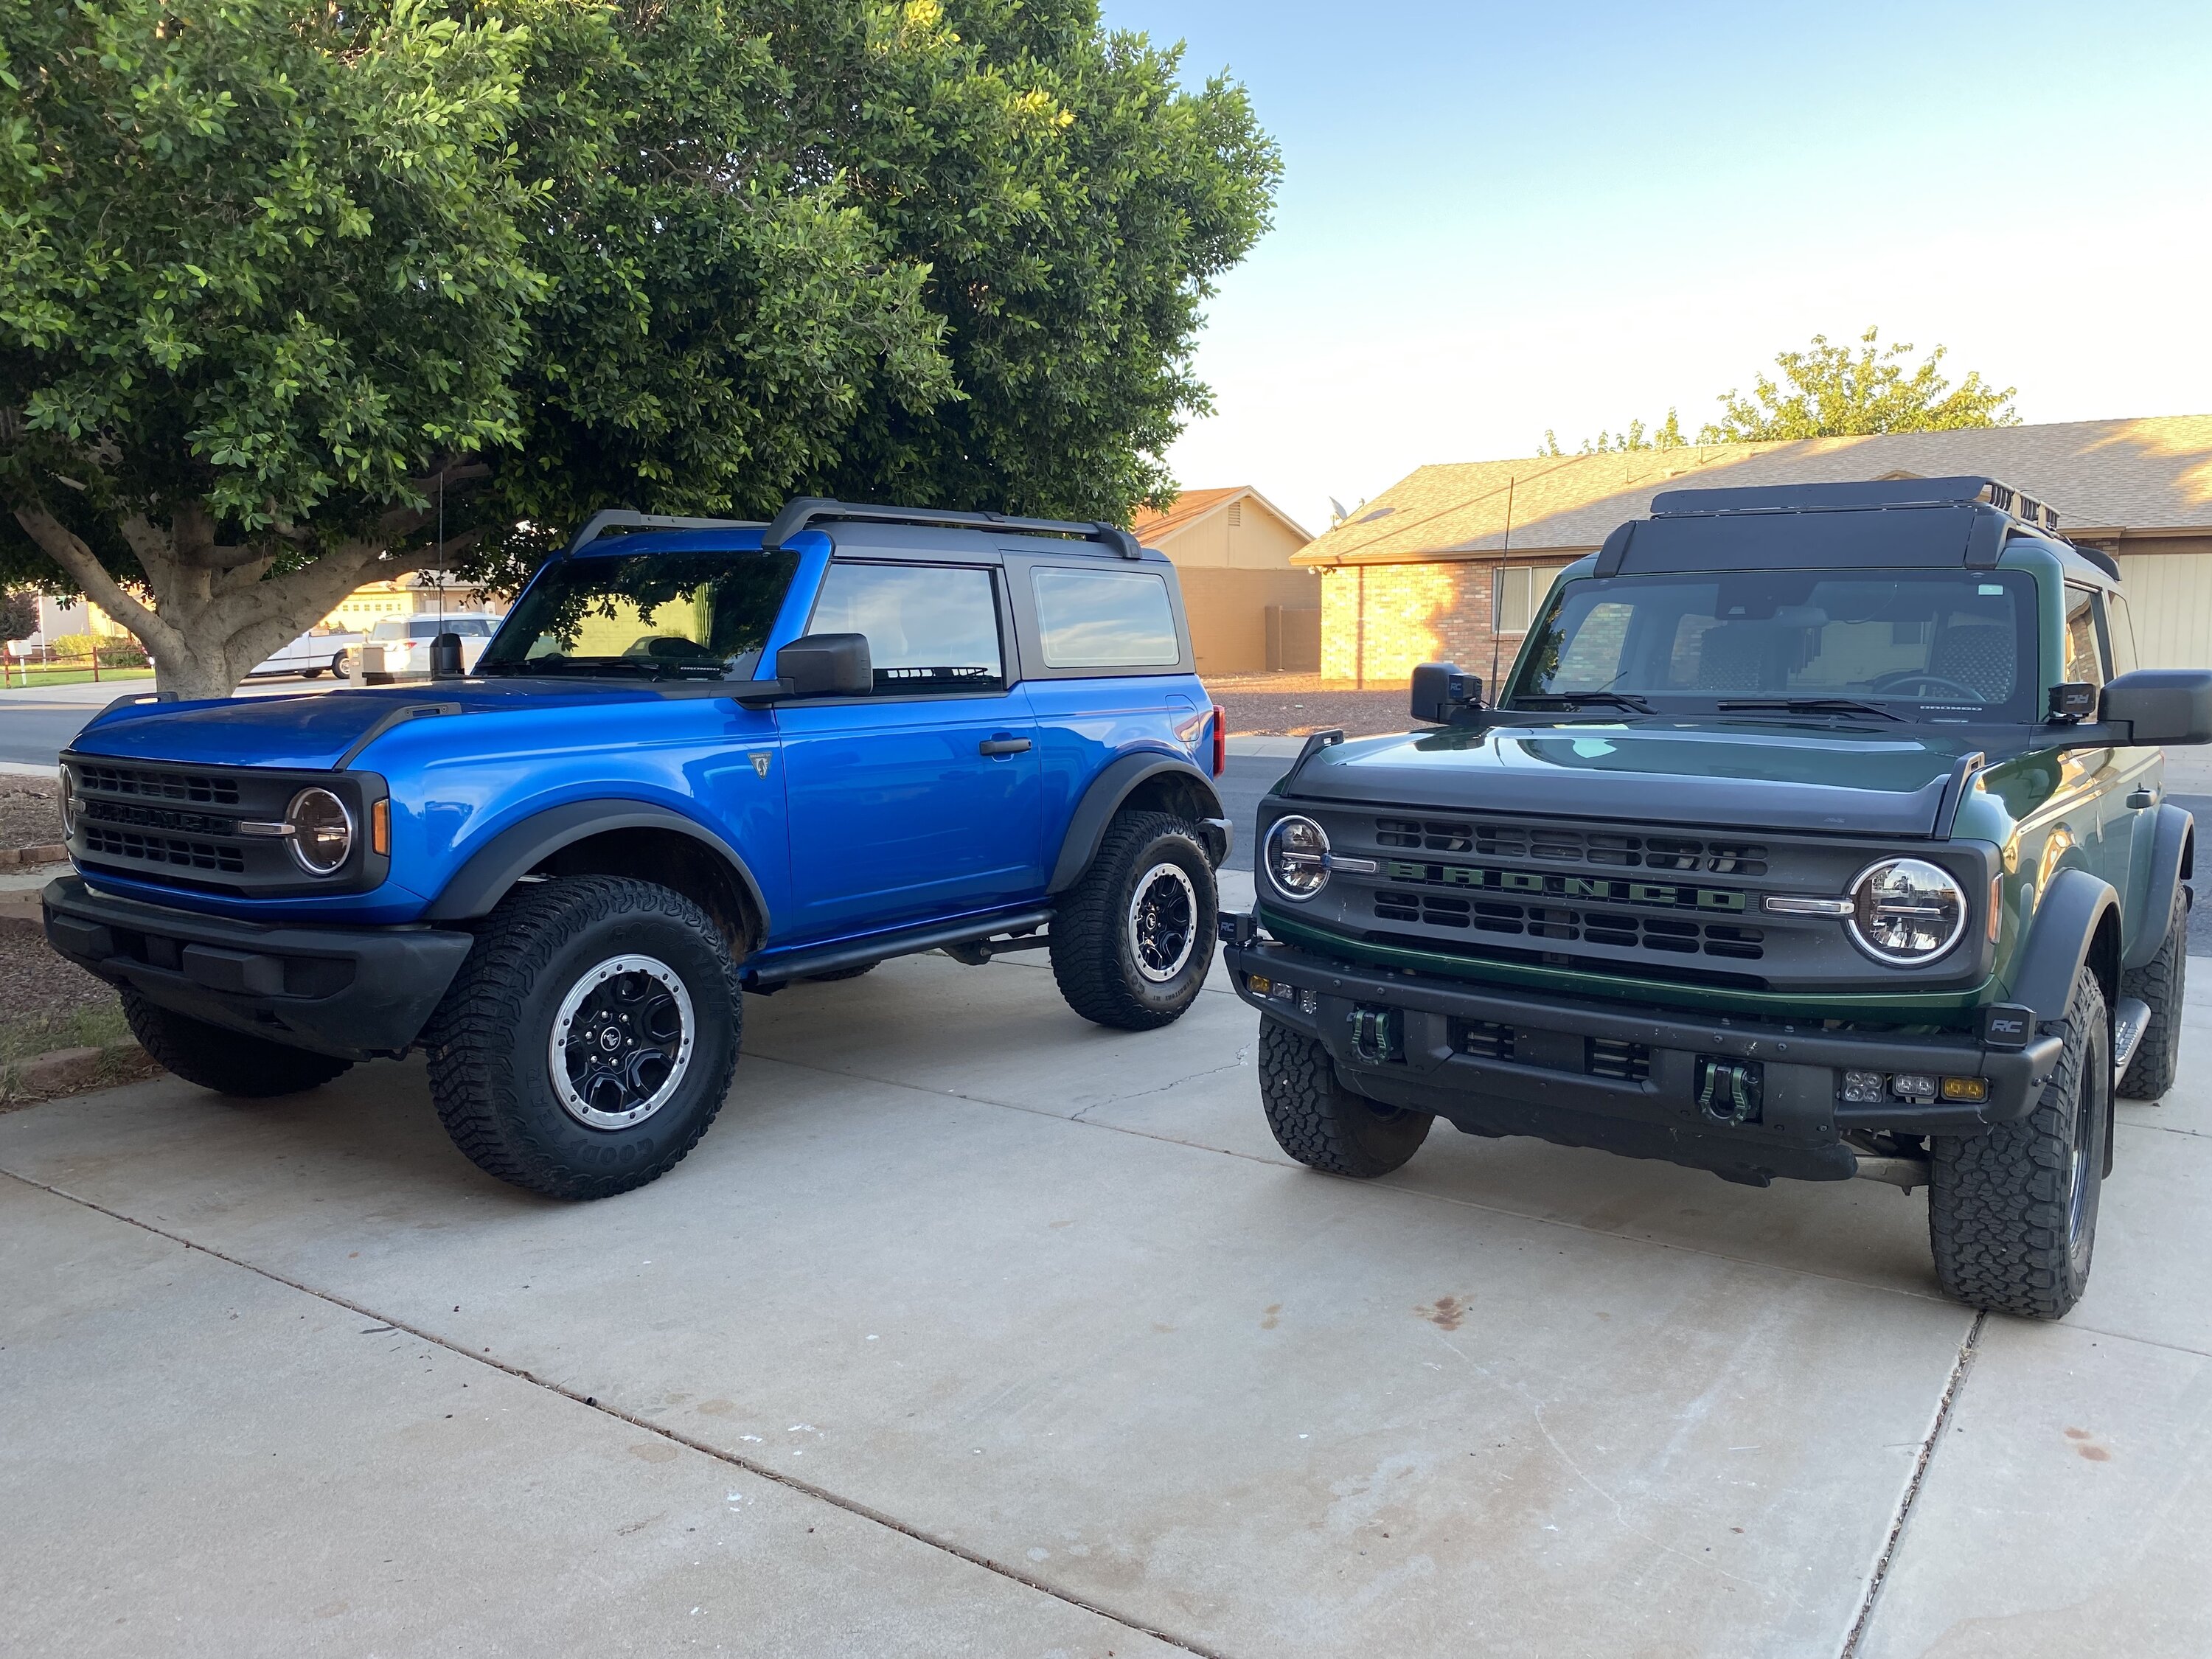 Ford Bronco What did you do TO / WITH your Bronco today? 👨🏻‍🔧🧰🚿🛠 PXL_20230702_160929525